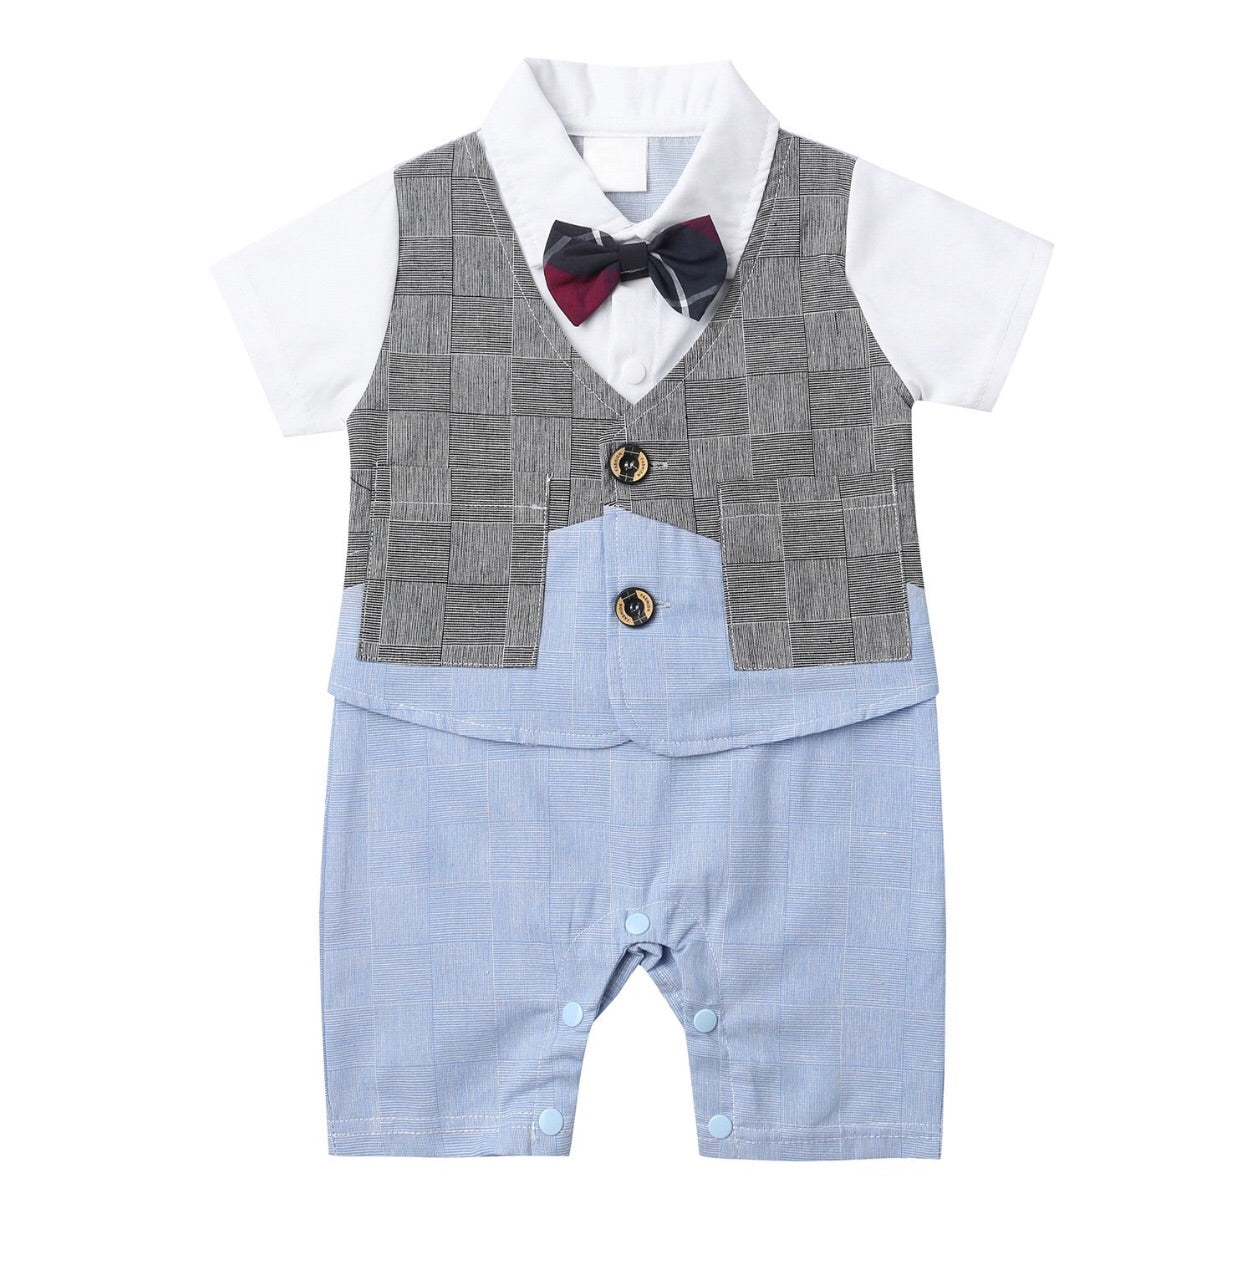 Short Sleeve Rompers with Bow Tie, Sizes 0 - 24 Months